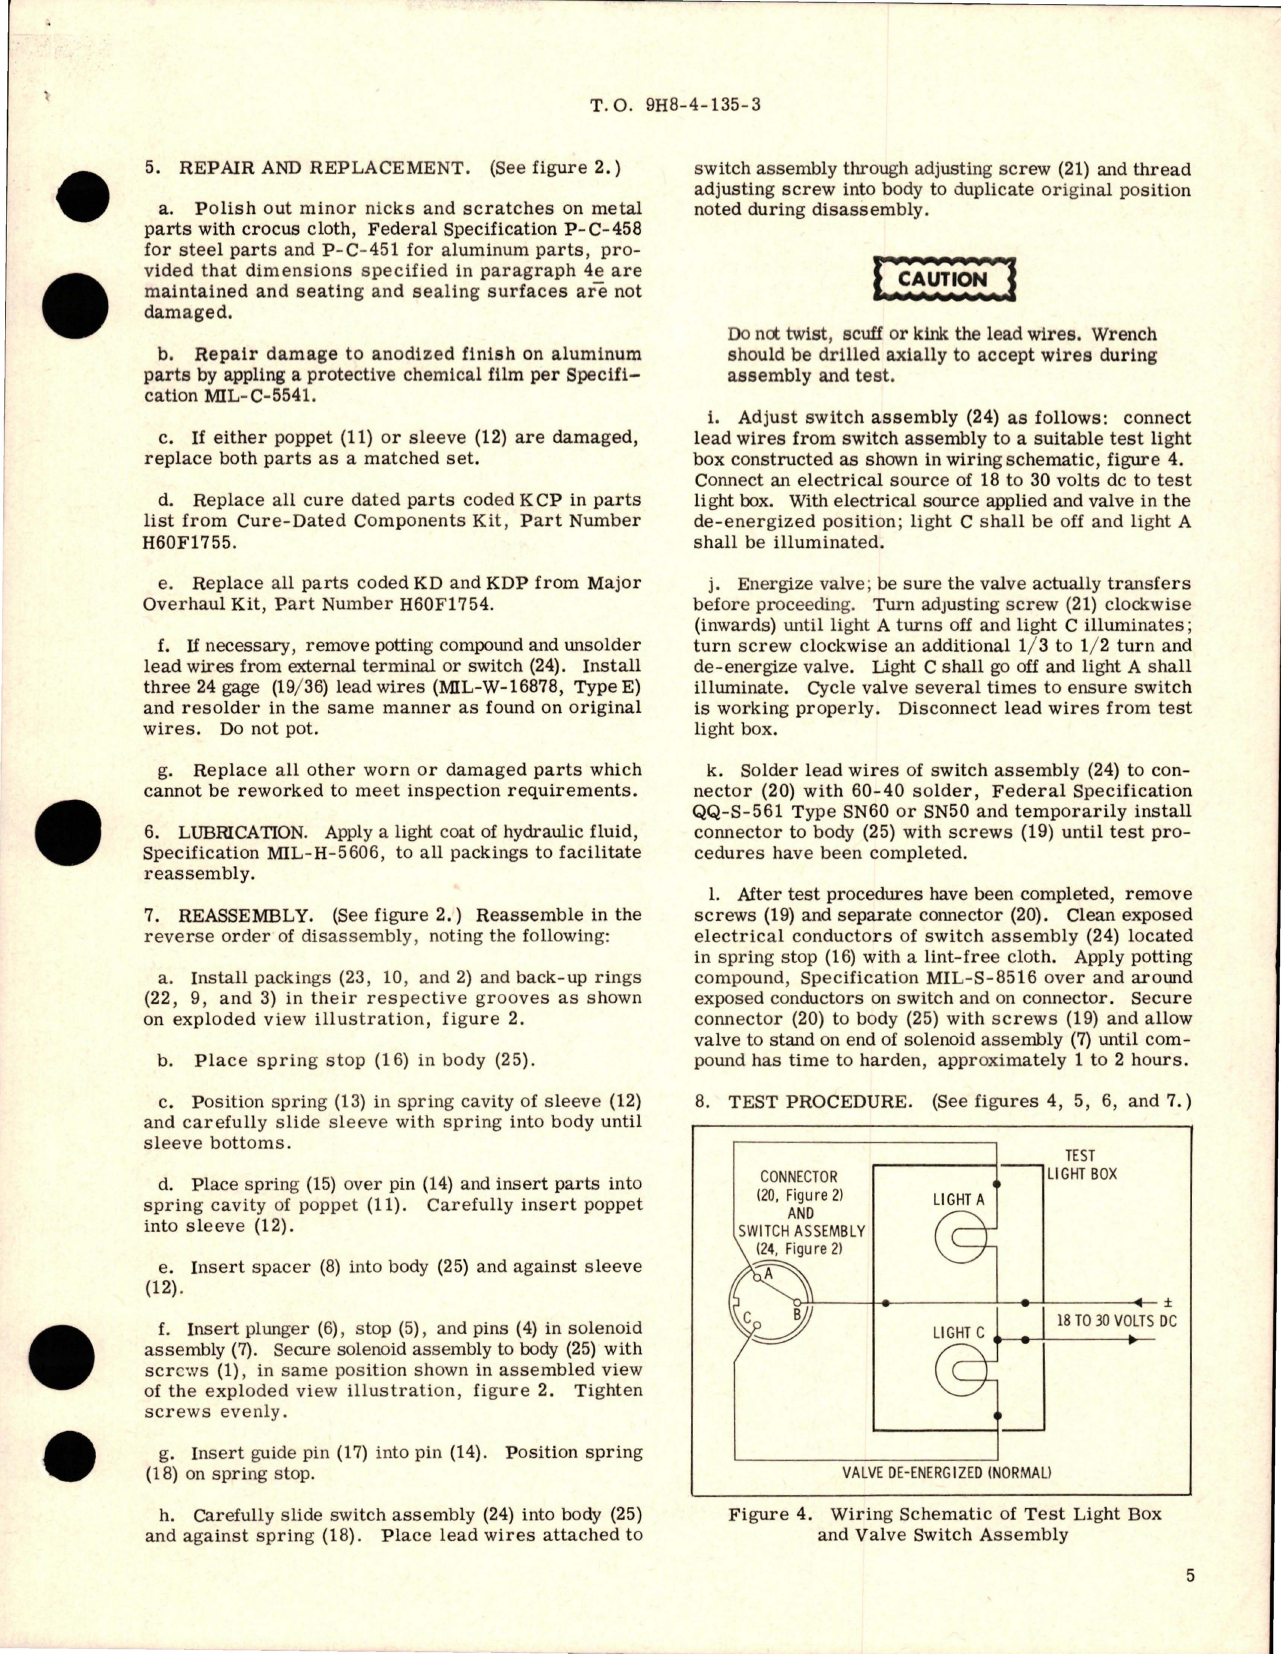 Sample page 5 from AirCorps Library document: Overhaul with Parts for Solenoid Operated Hydraulic Shutoff Valve - Part 1374-598937